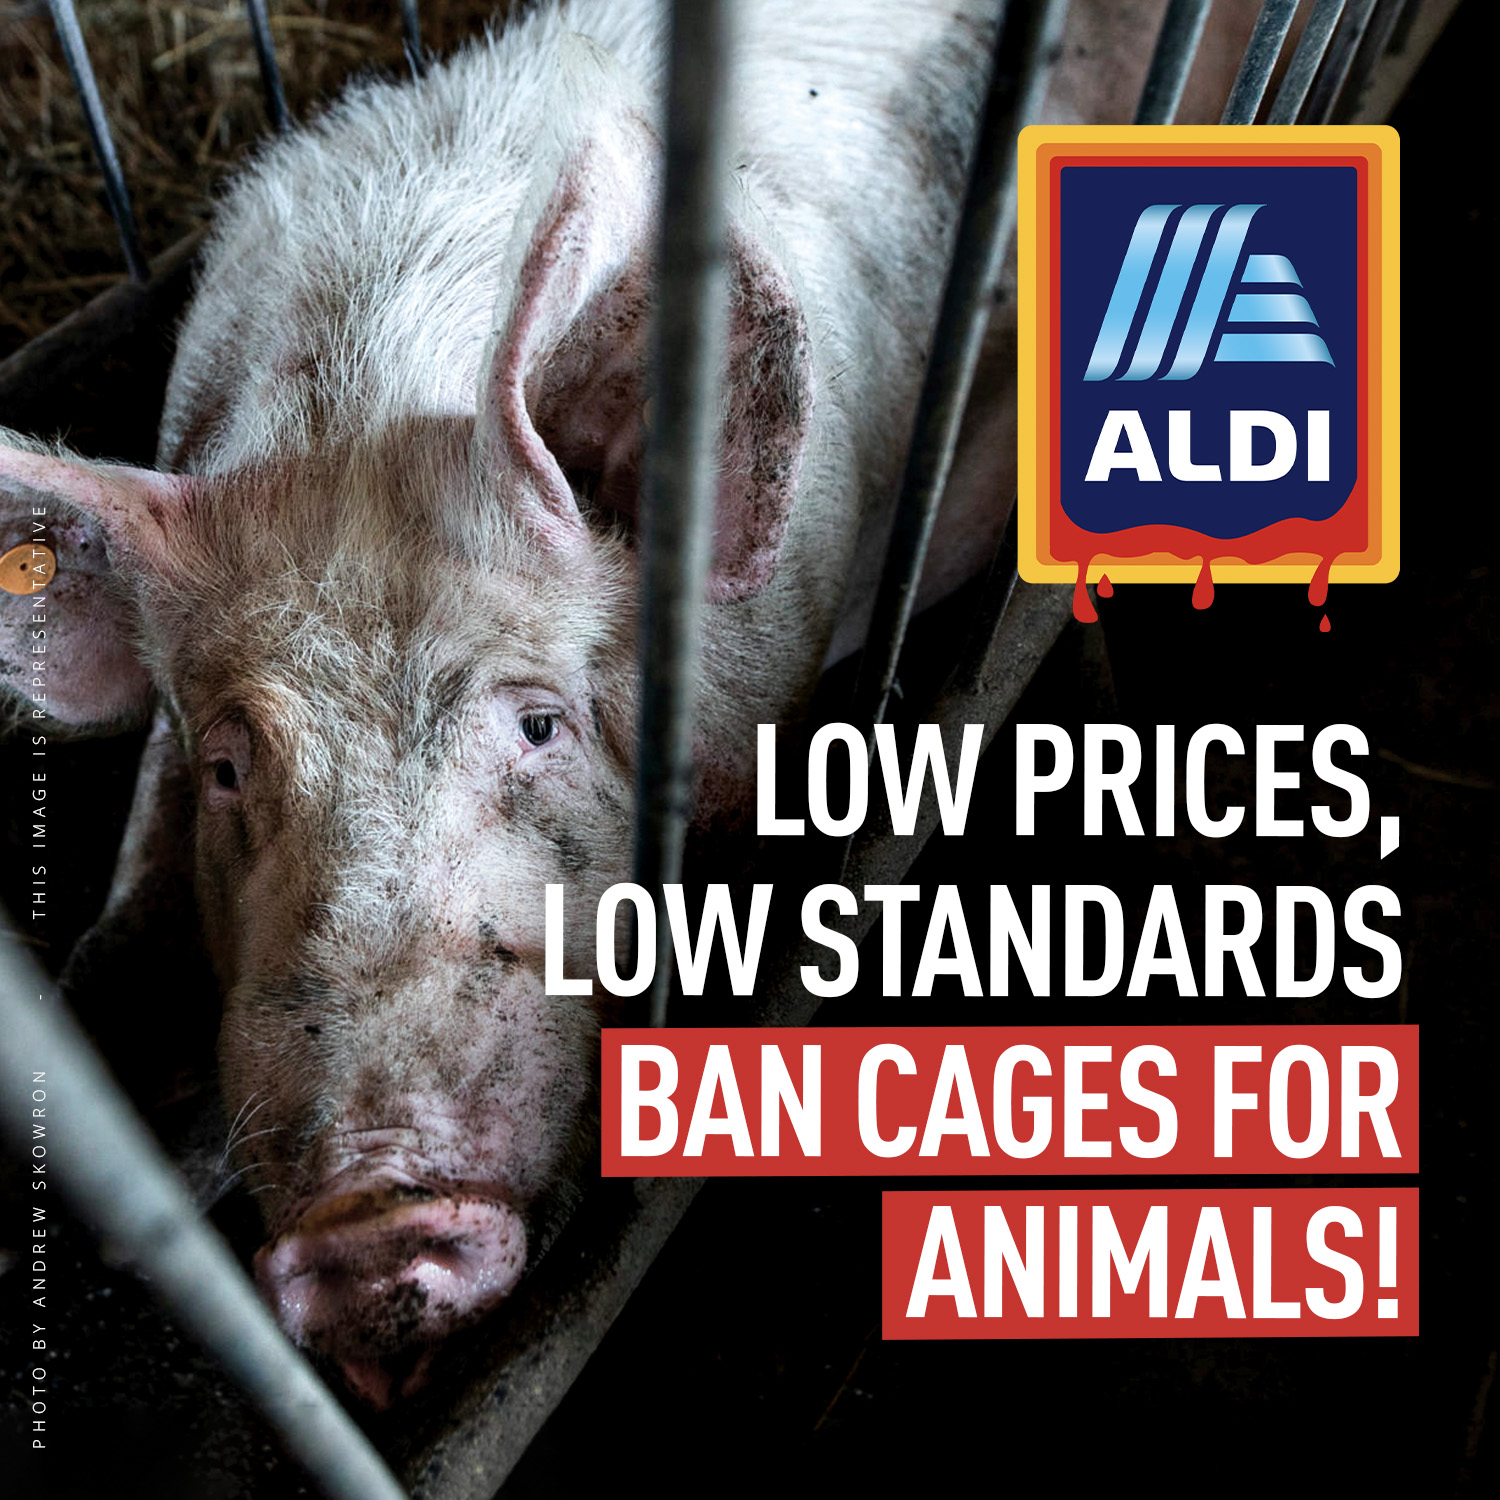 Pig in a cage with a message asking Aldi to ban cages.